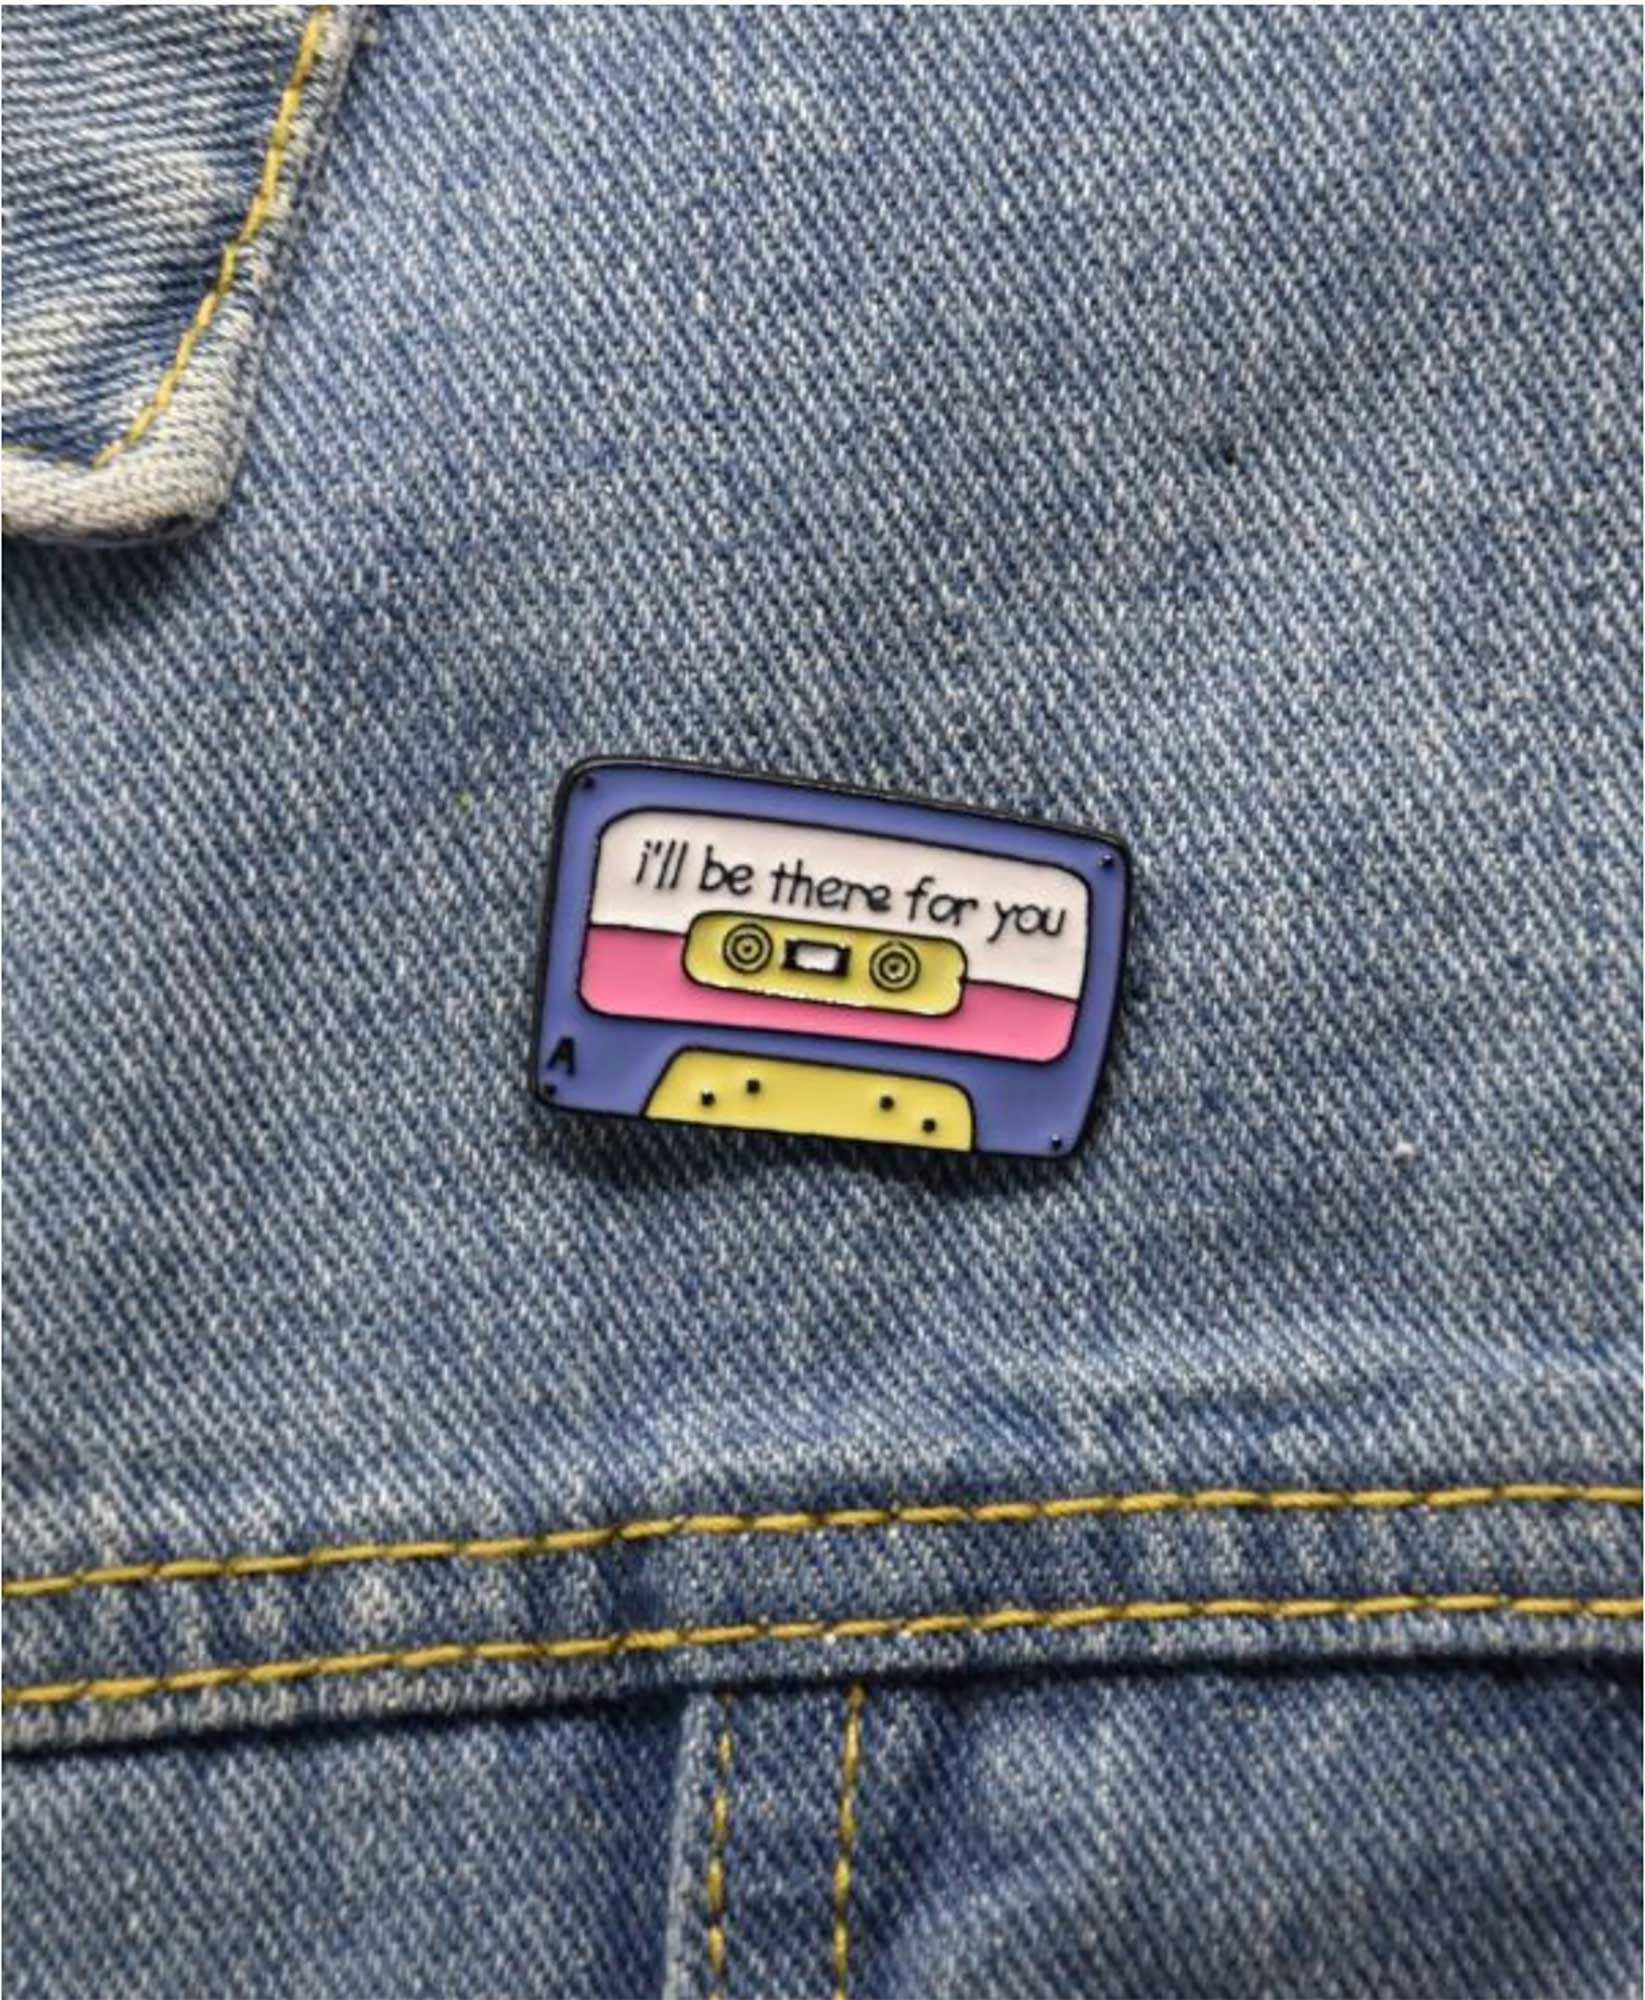 I'll Be There For You Enamel Pin